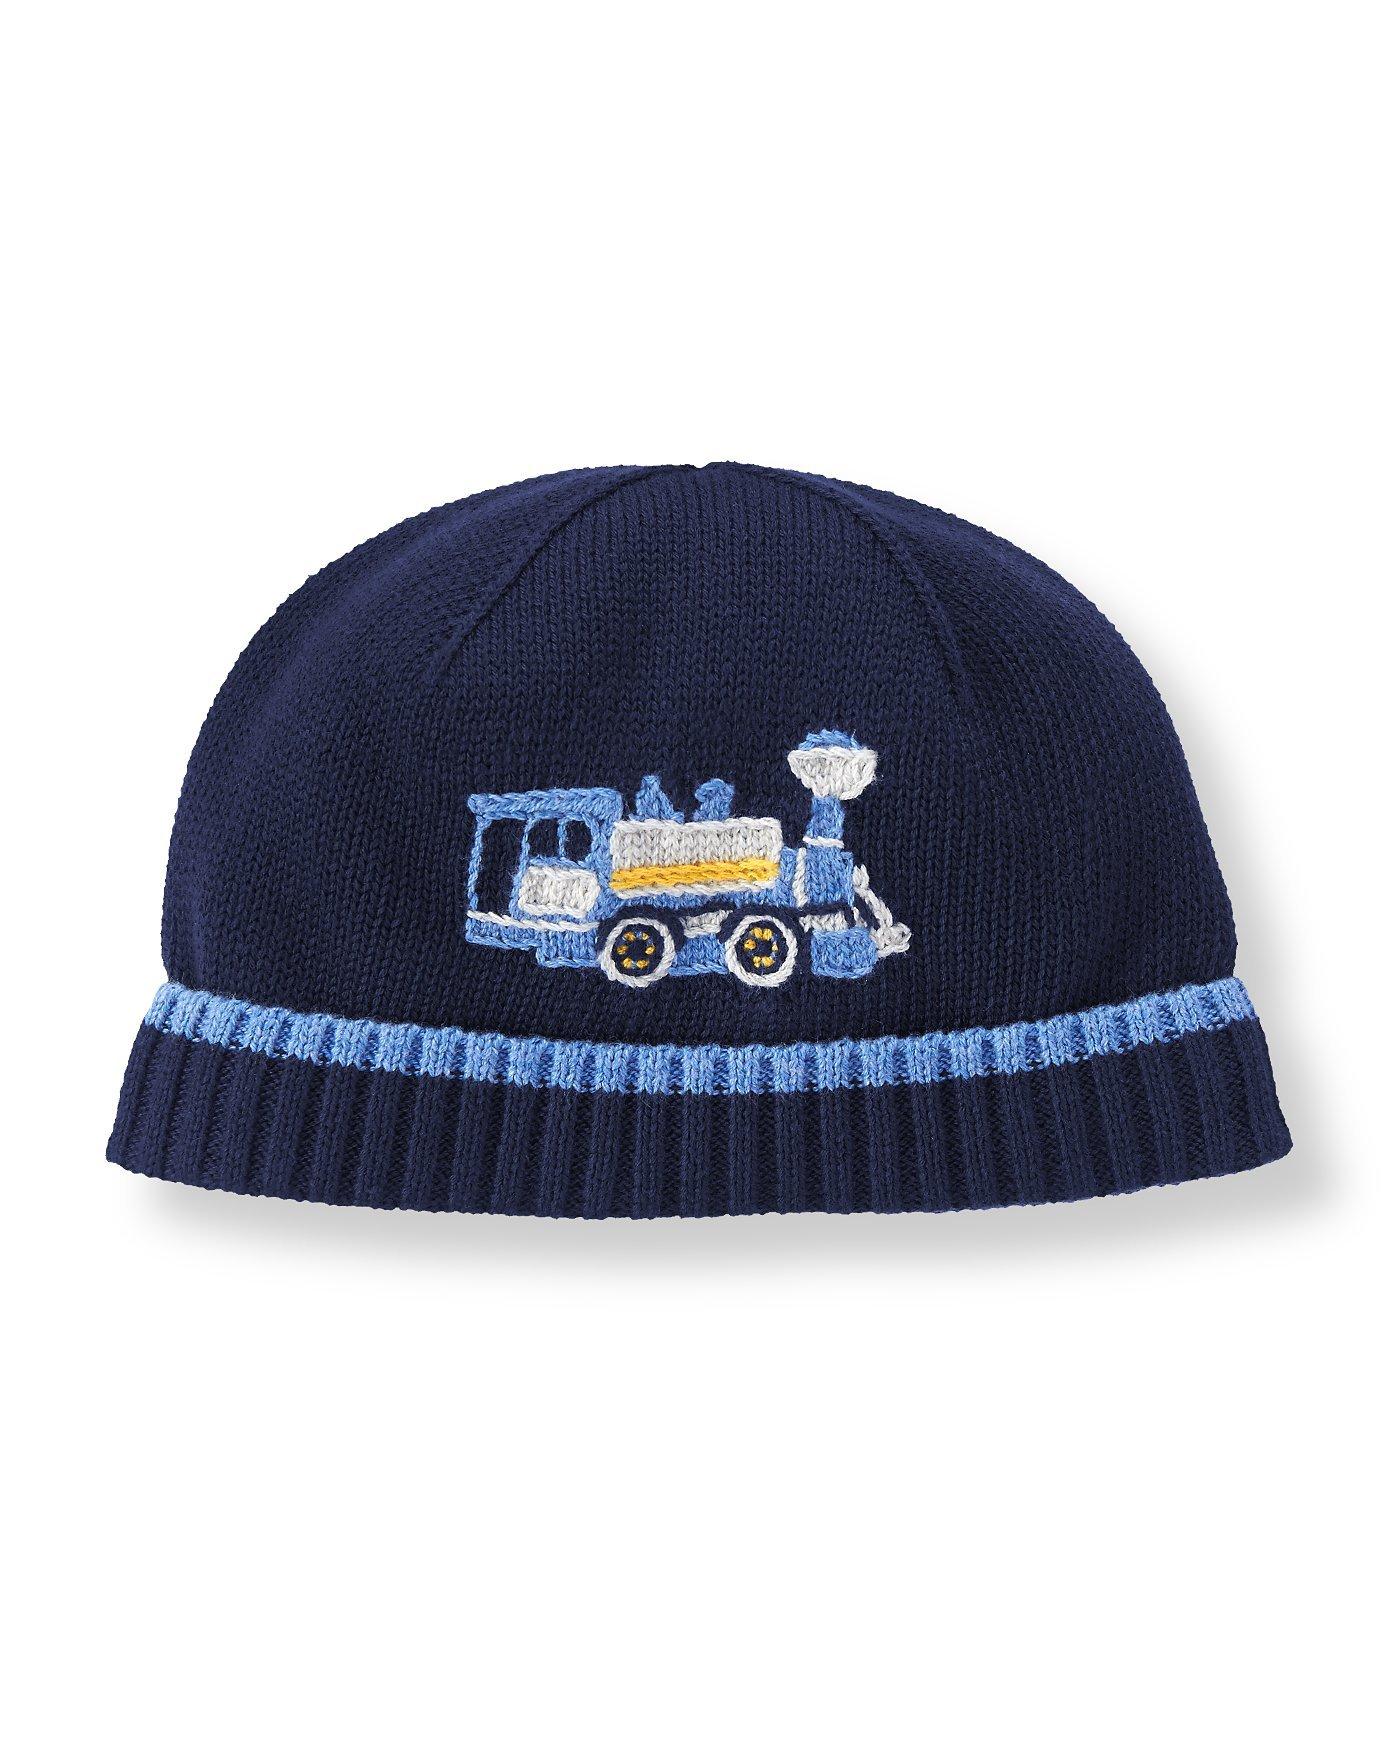 Train Sweater Hat image number 0